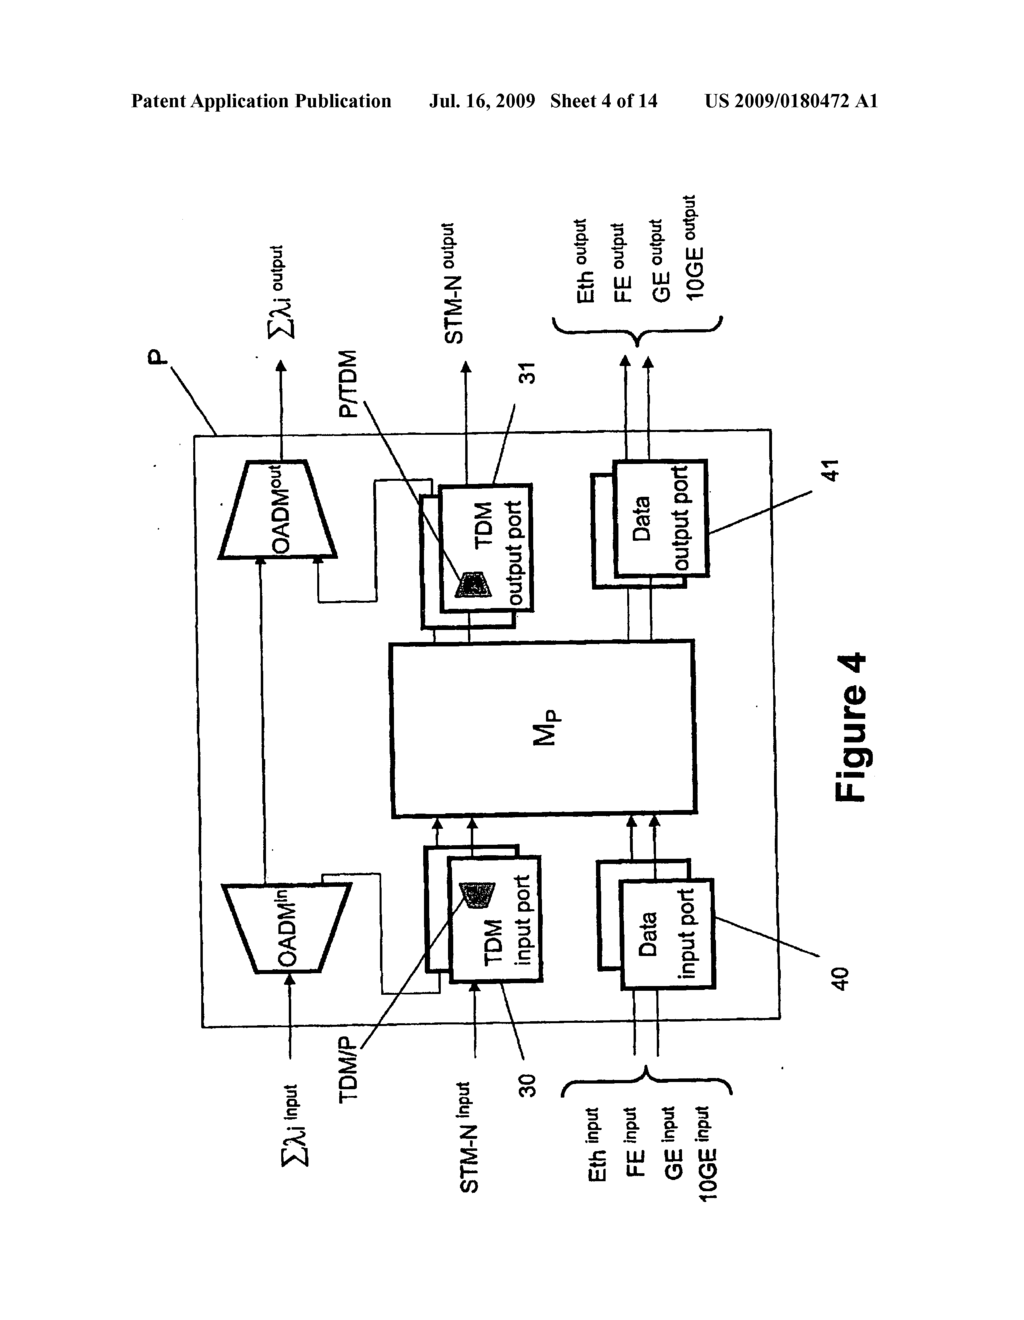 Multi-service transport apparatus with switch for integrated transport networks - diagram, schematic, and image 05